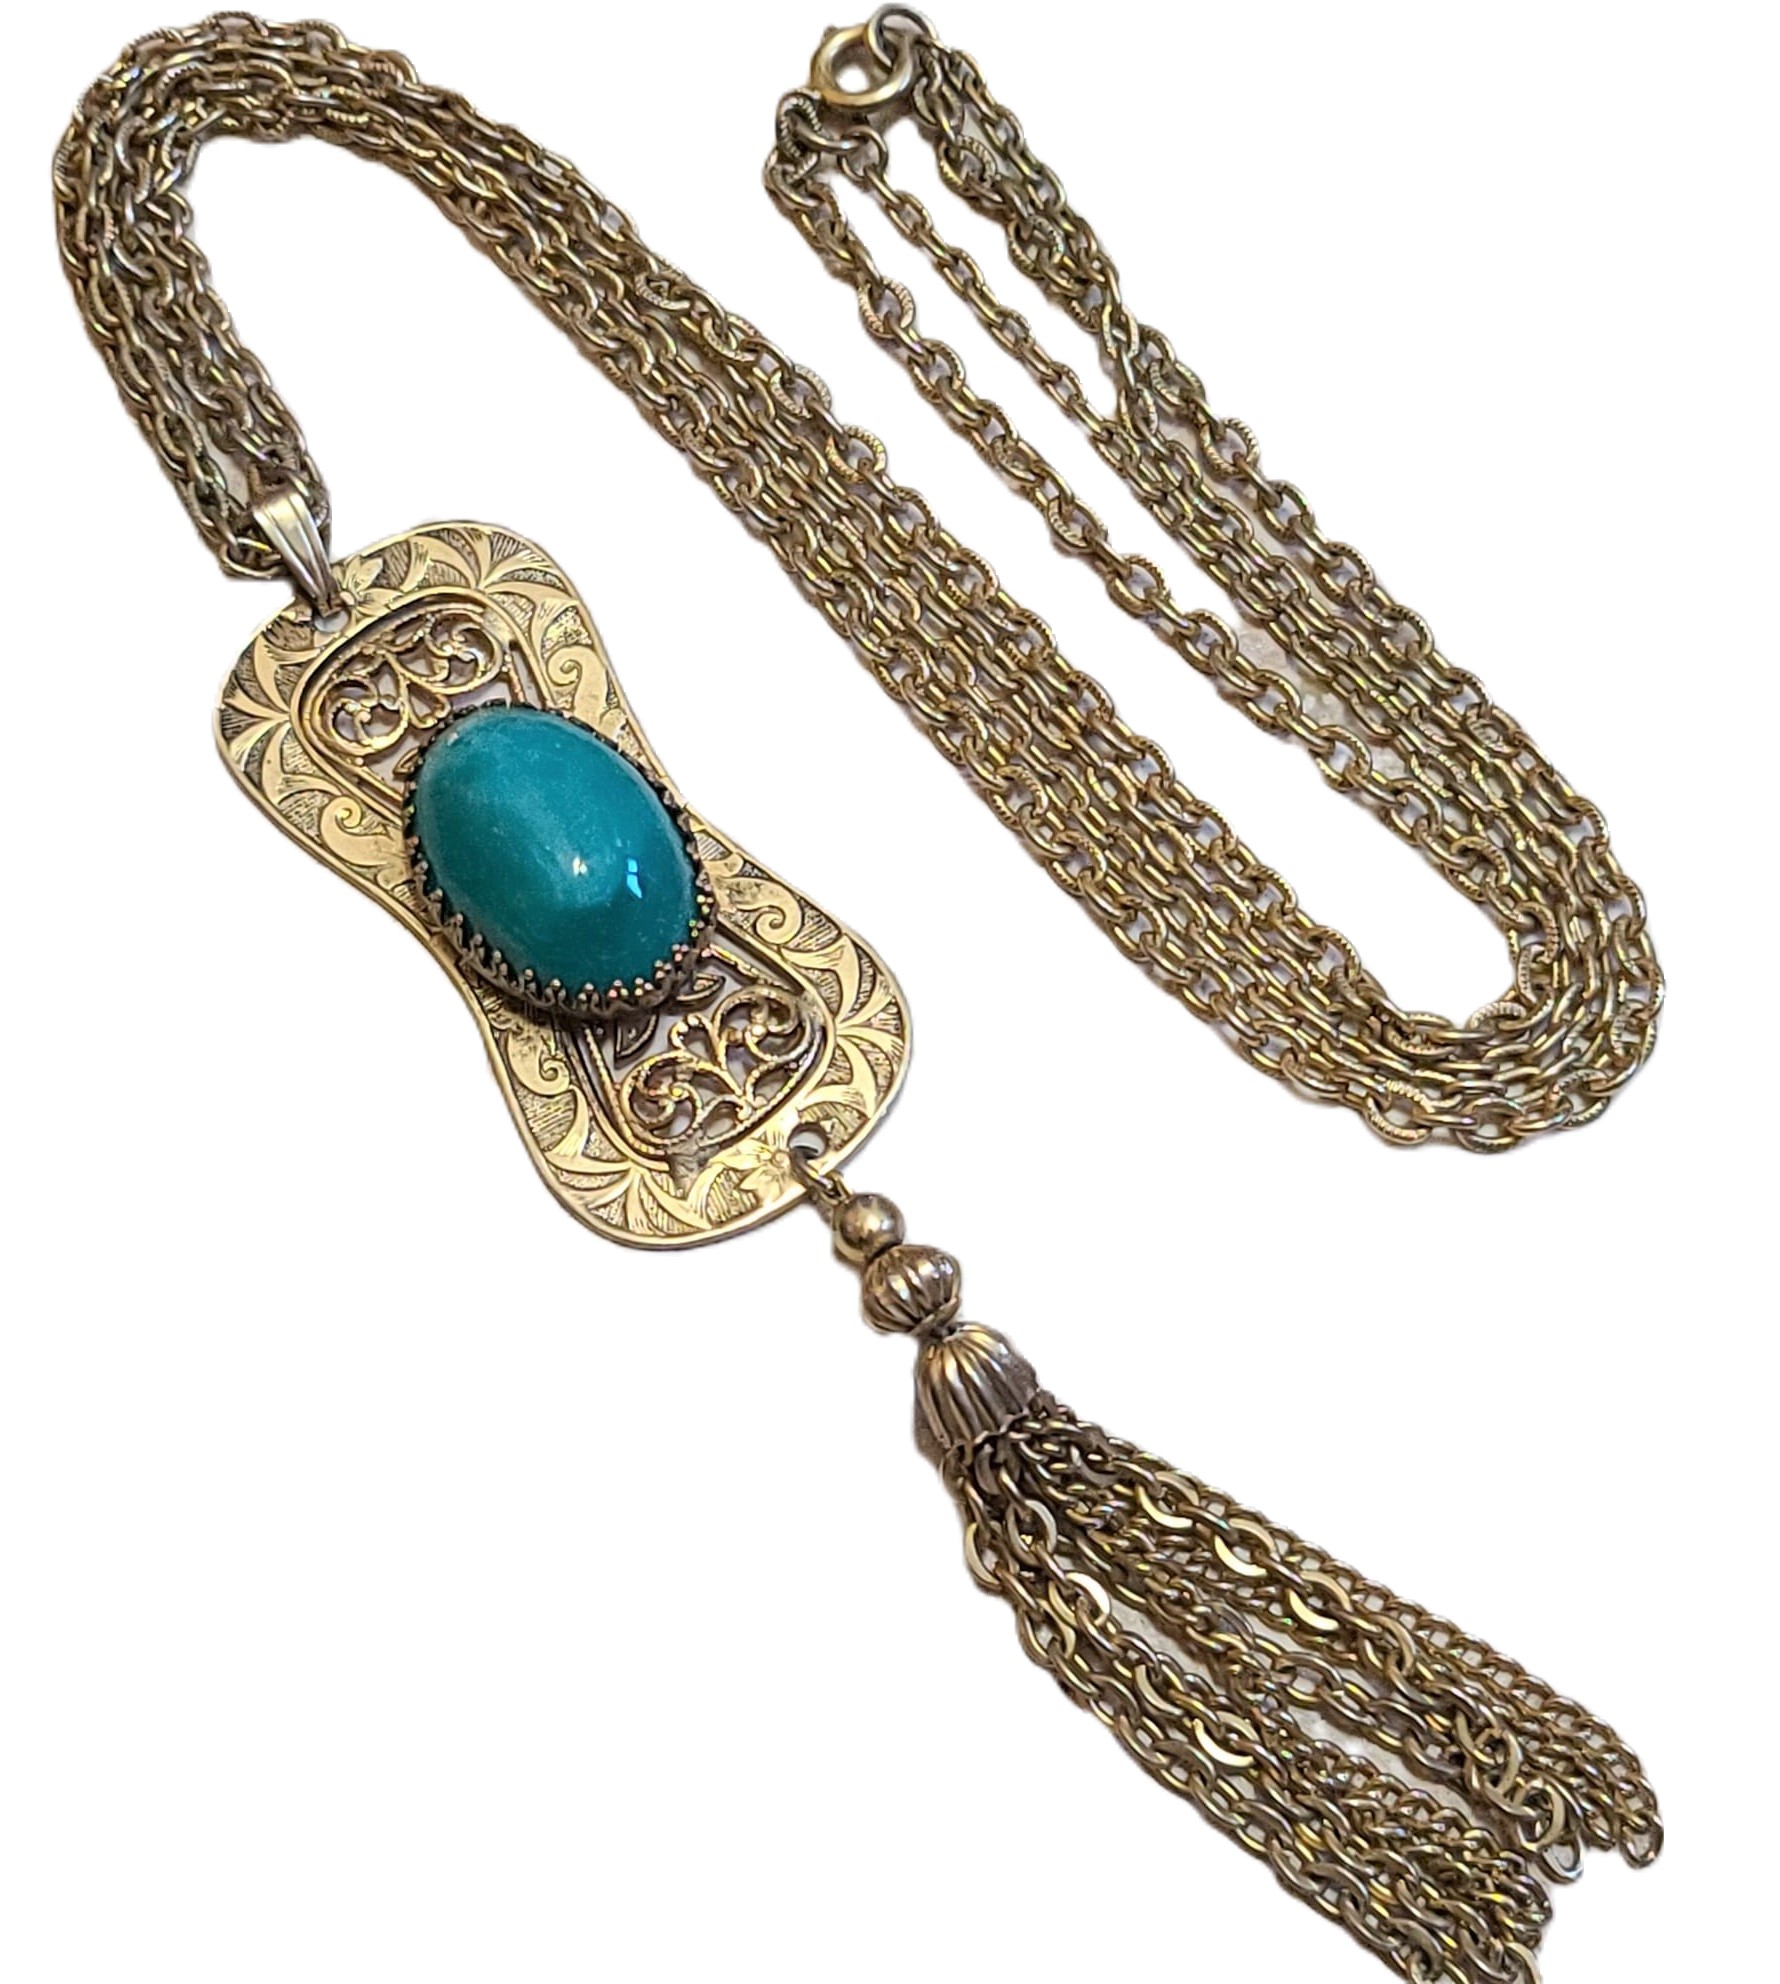 Asian Filigree with Green Cabachon 24" Tassel Necklace